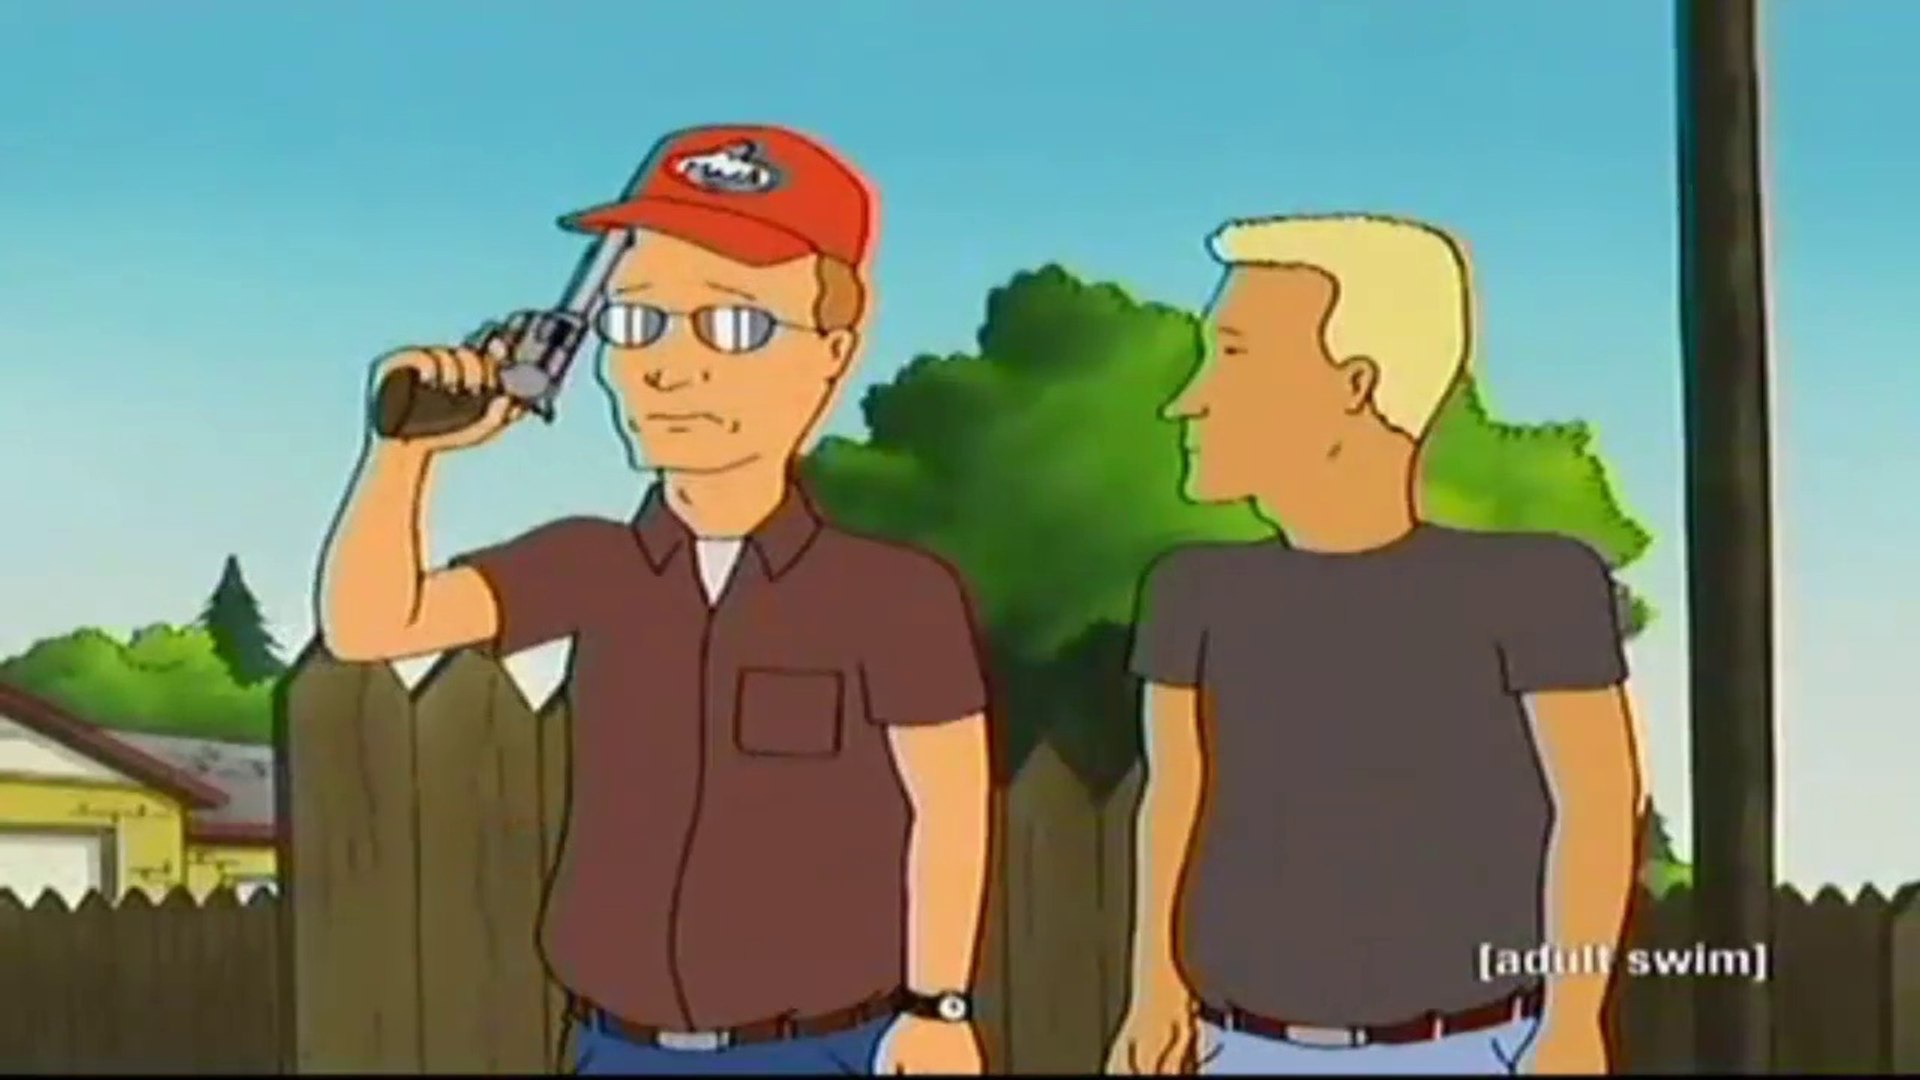 Watch King of the Hill on Adult Swim